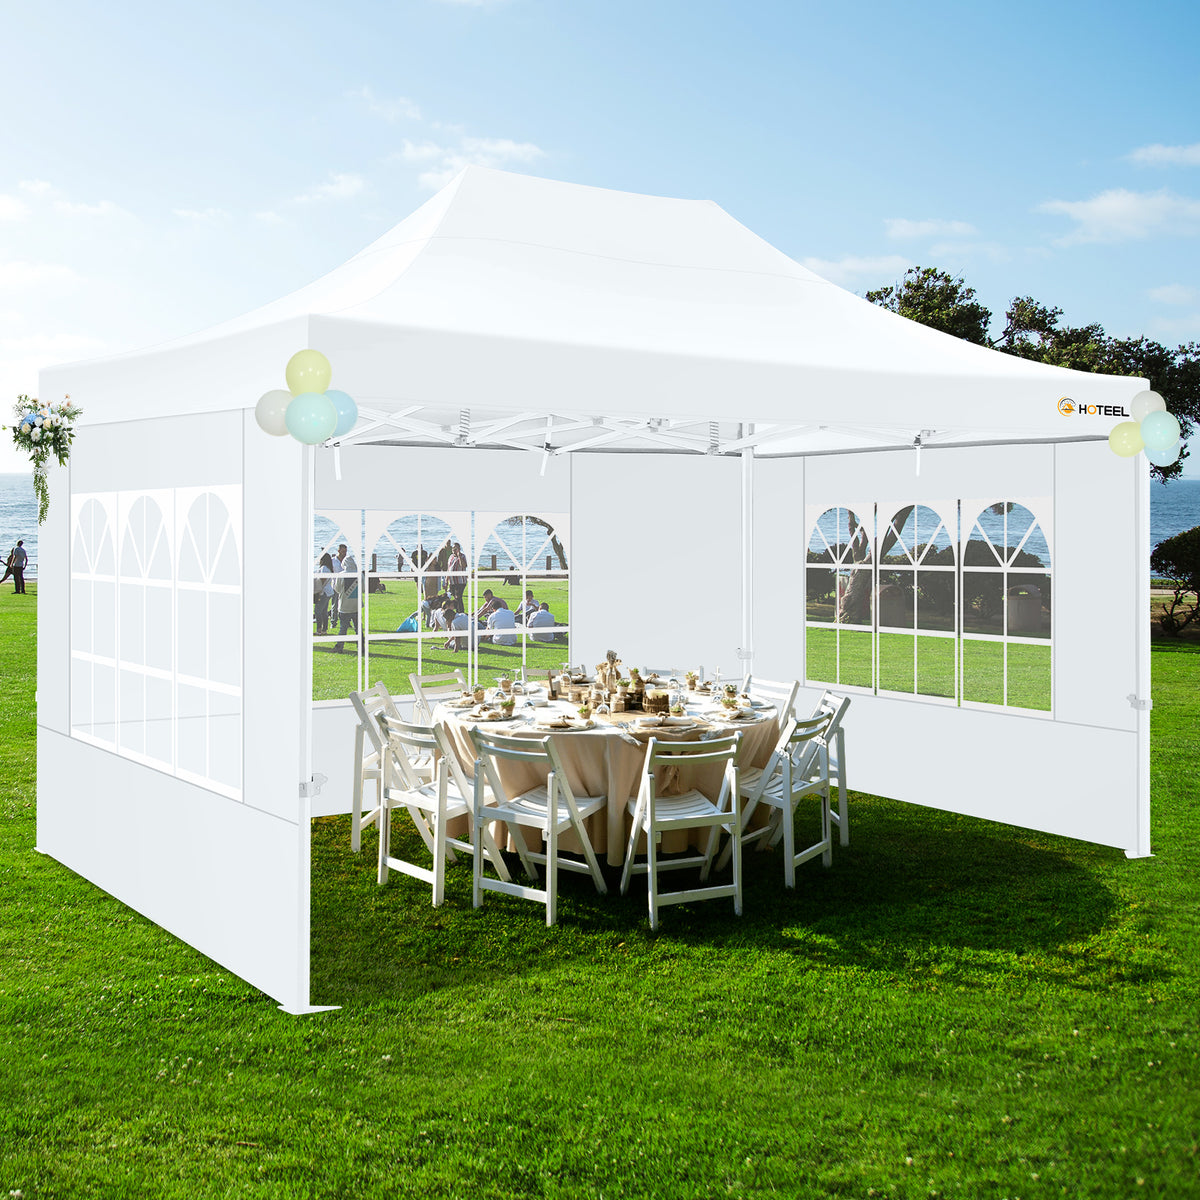 HOTEEL 10x15 Canopy Tent with 4 Sidewalls,Heavy Duty Pop Up Canopy Tent for Parties Wedding,Commercial Canopy with Roller Bag,UV 50+&Upgraded Waterproof,Thickened Legs,White